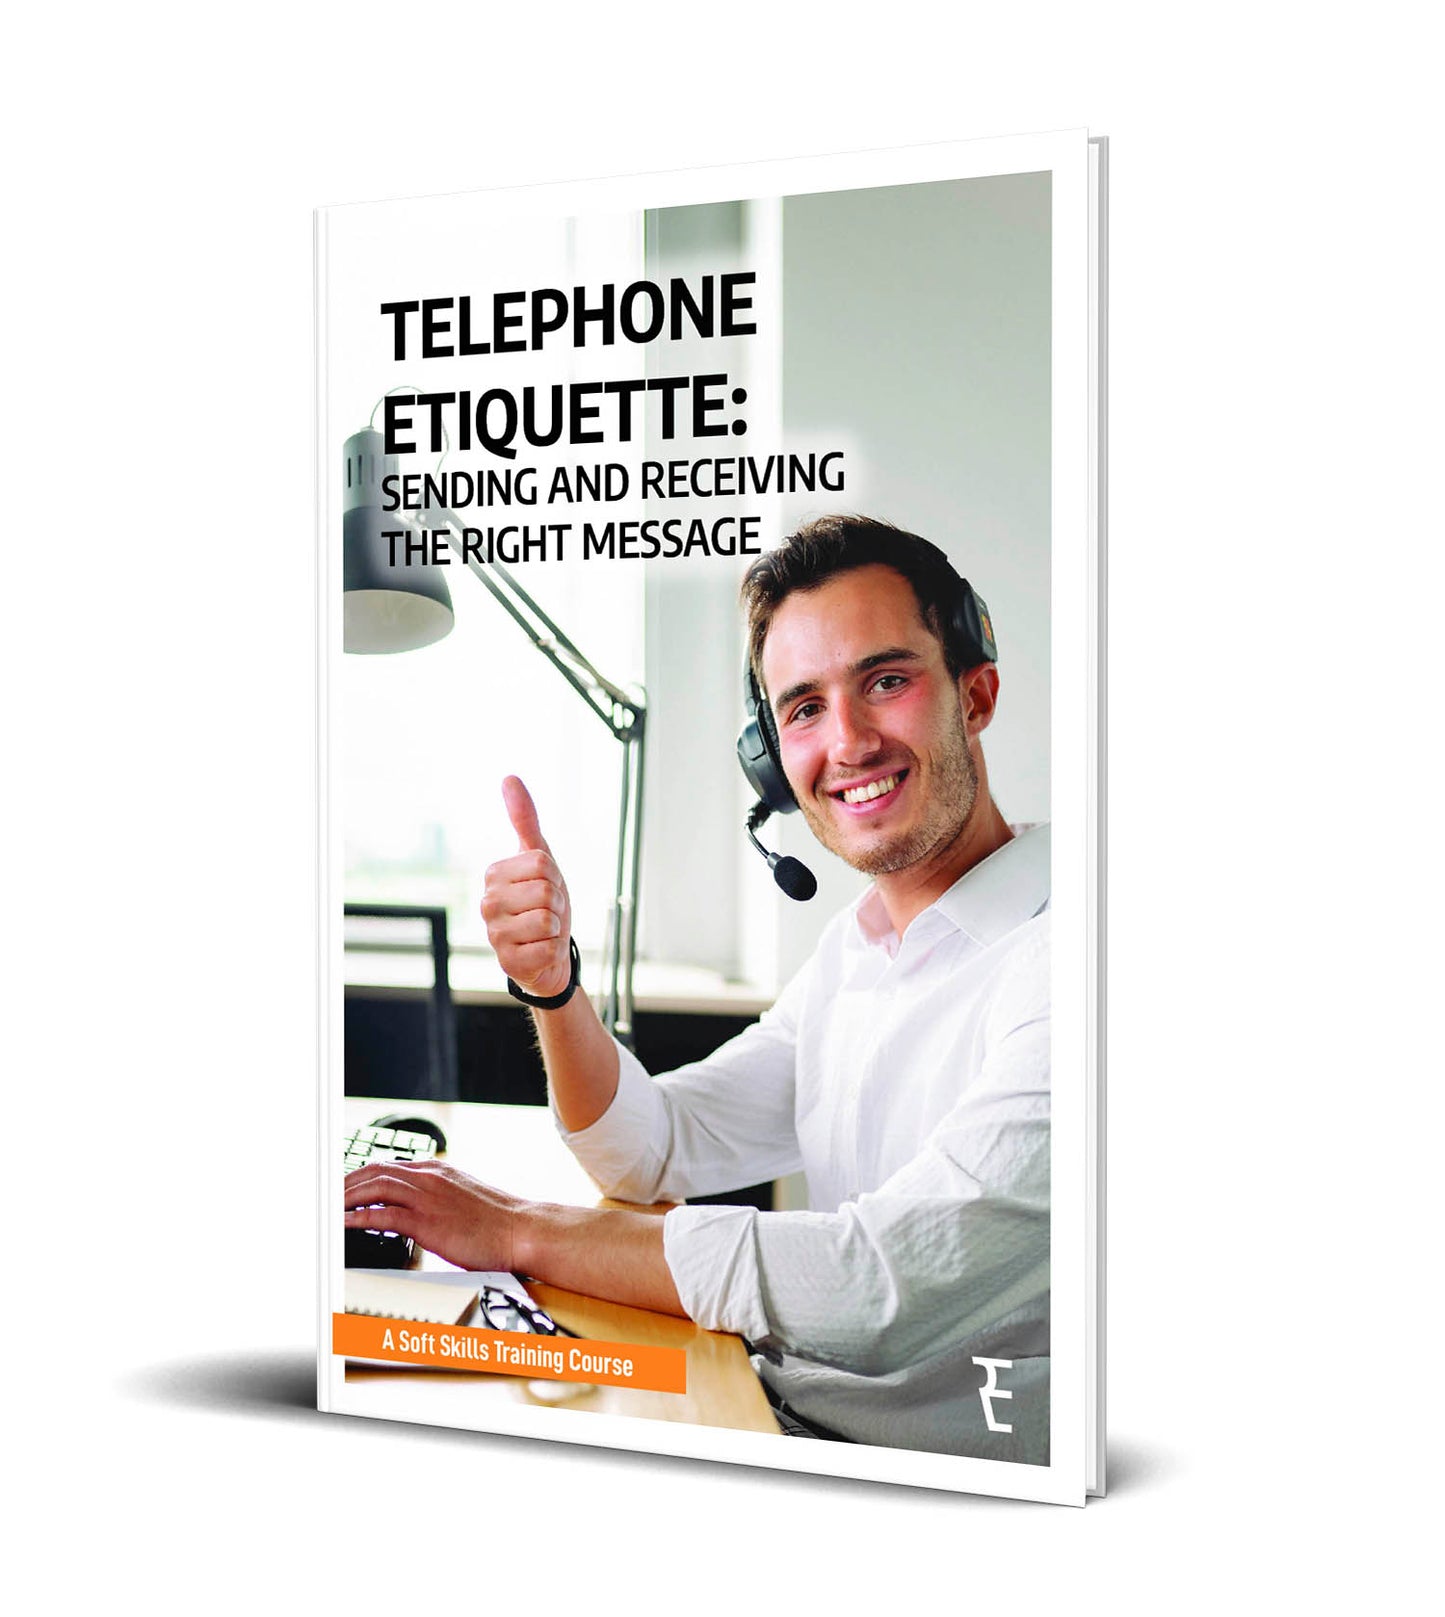 TELEPHONE ETIQUETTE: SENDING AND RECEIVING THE RIGHT MESSAGE